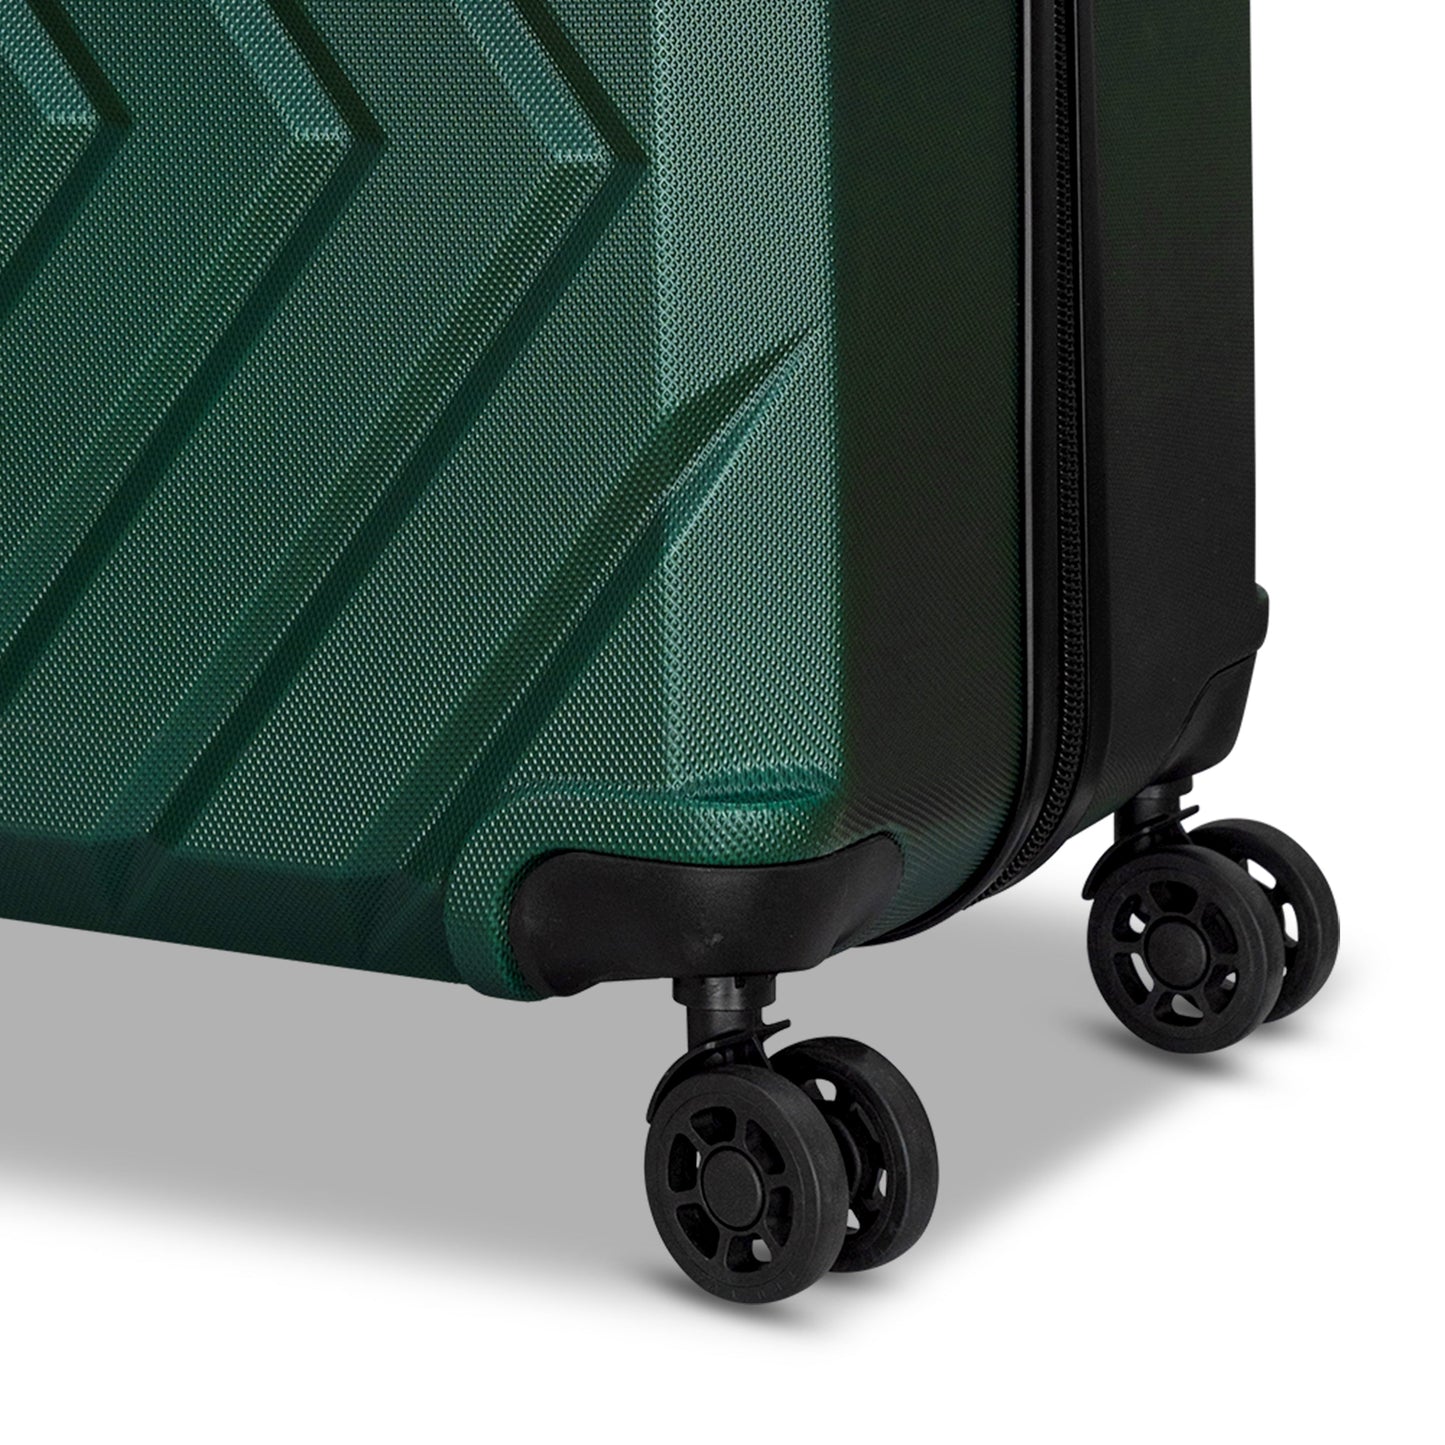 20" Carry-on Luggage Highlander Collection